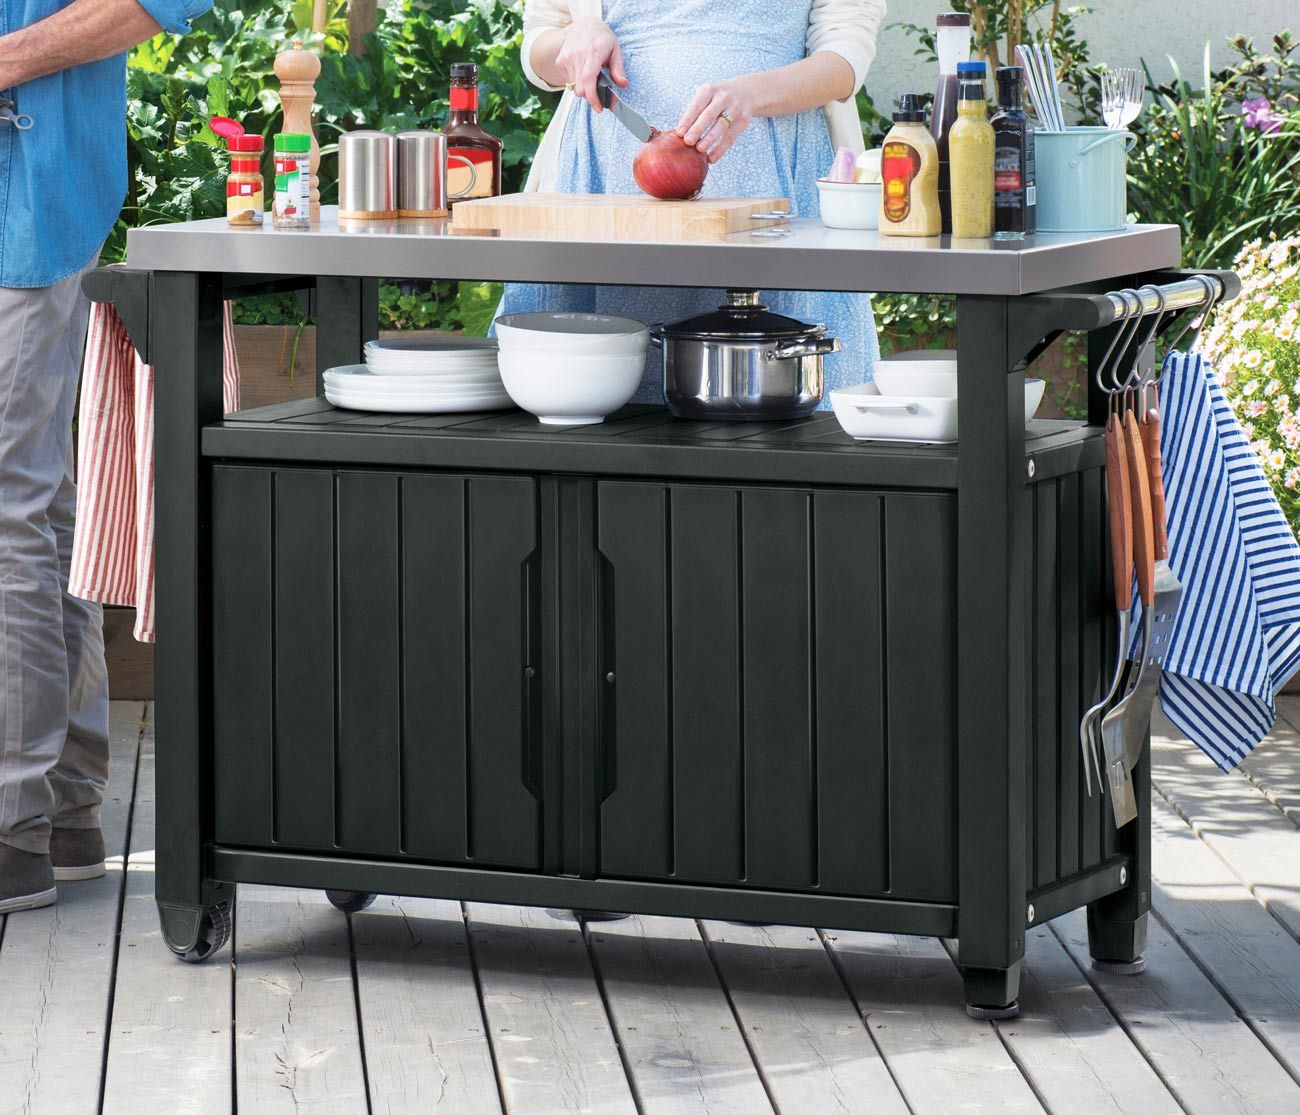 KETER UNITY BBQ STORAGE/WORK TABLE